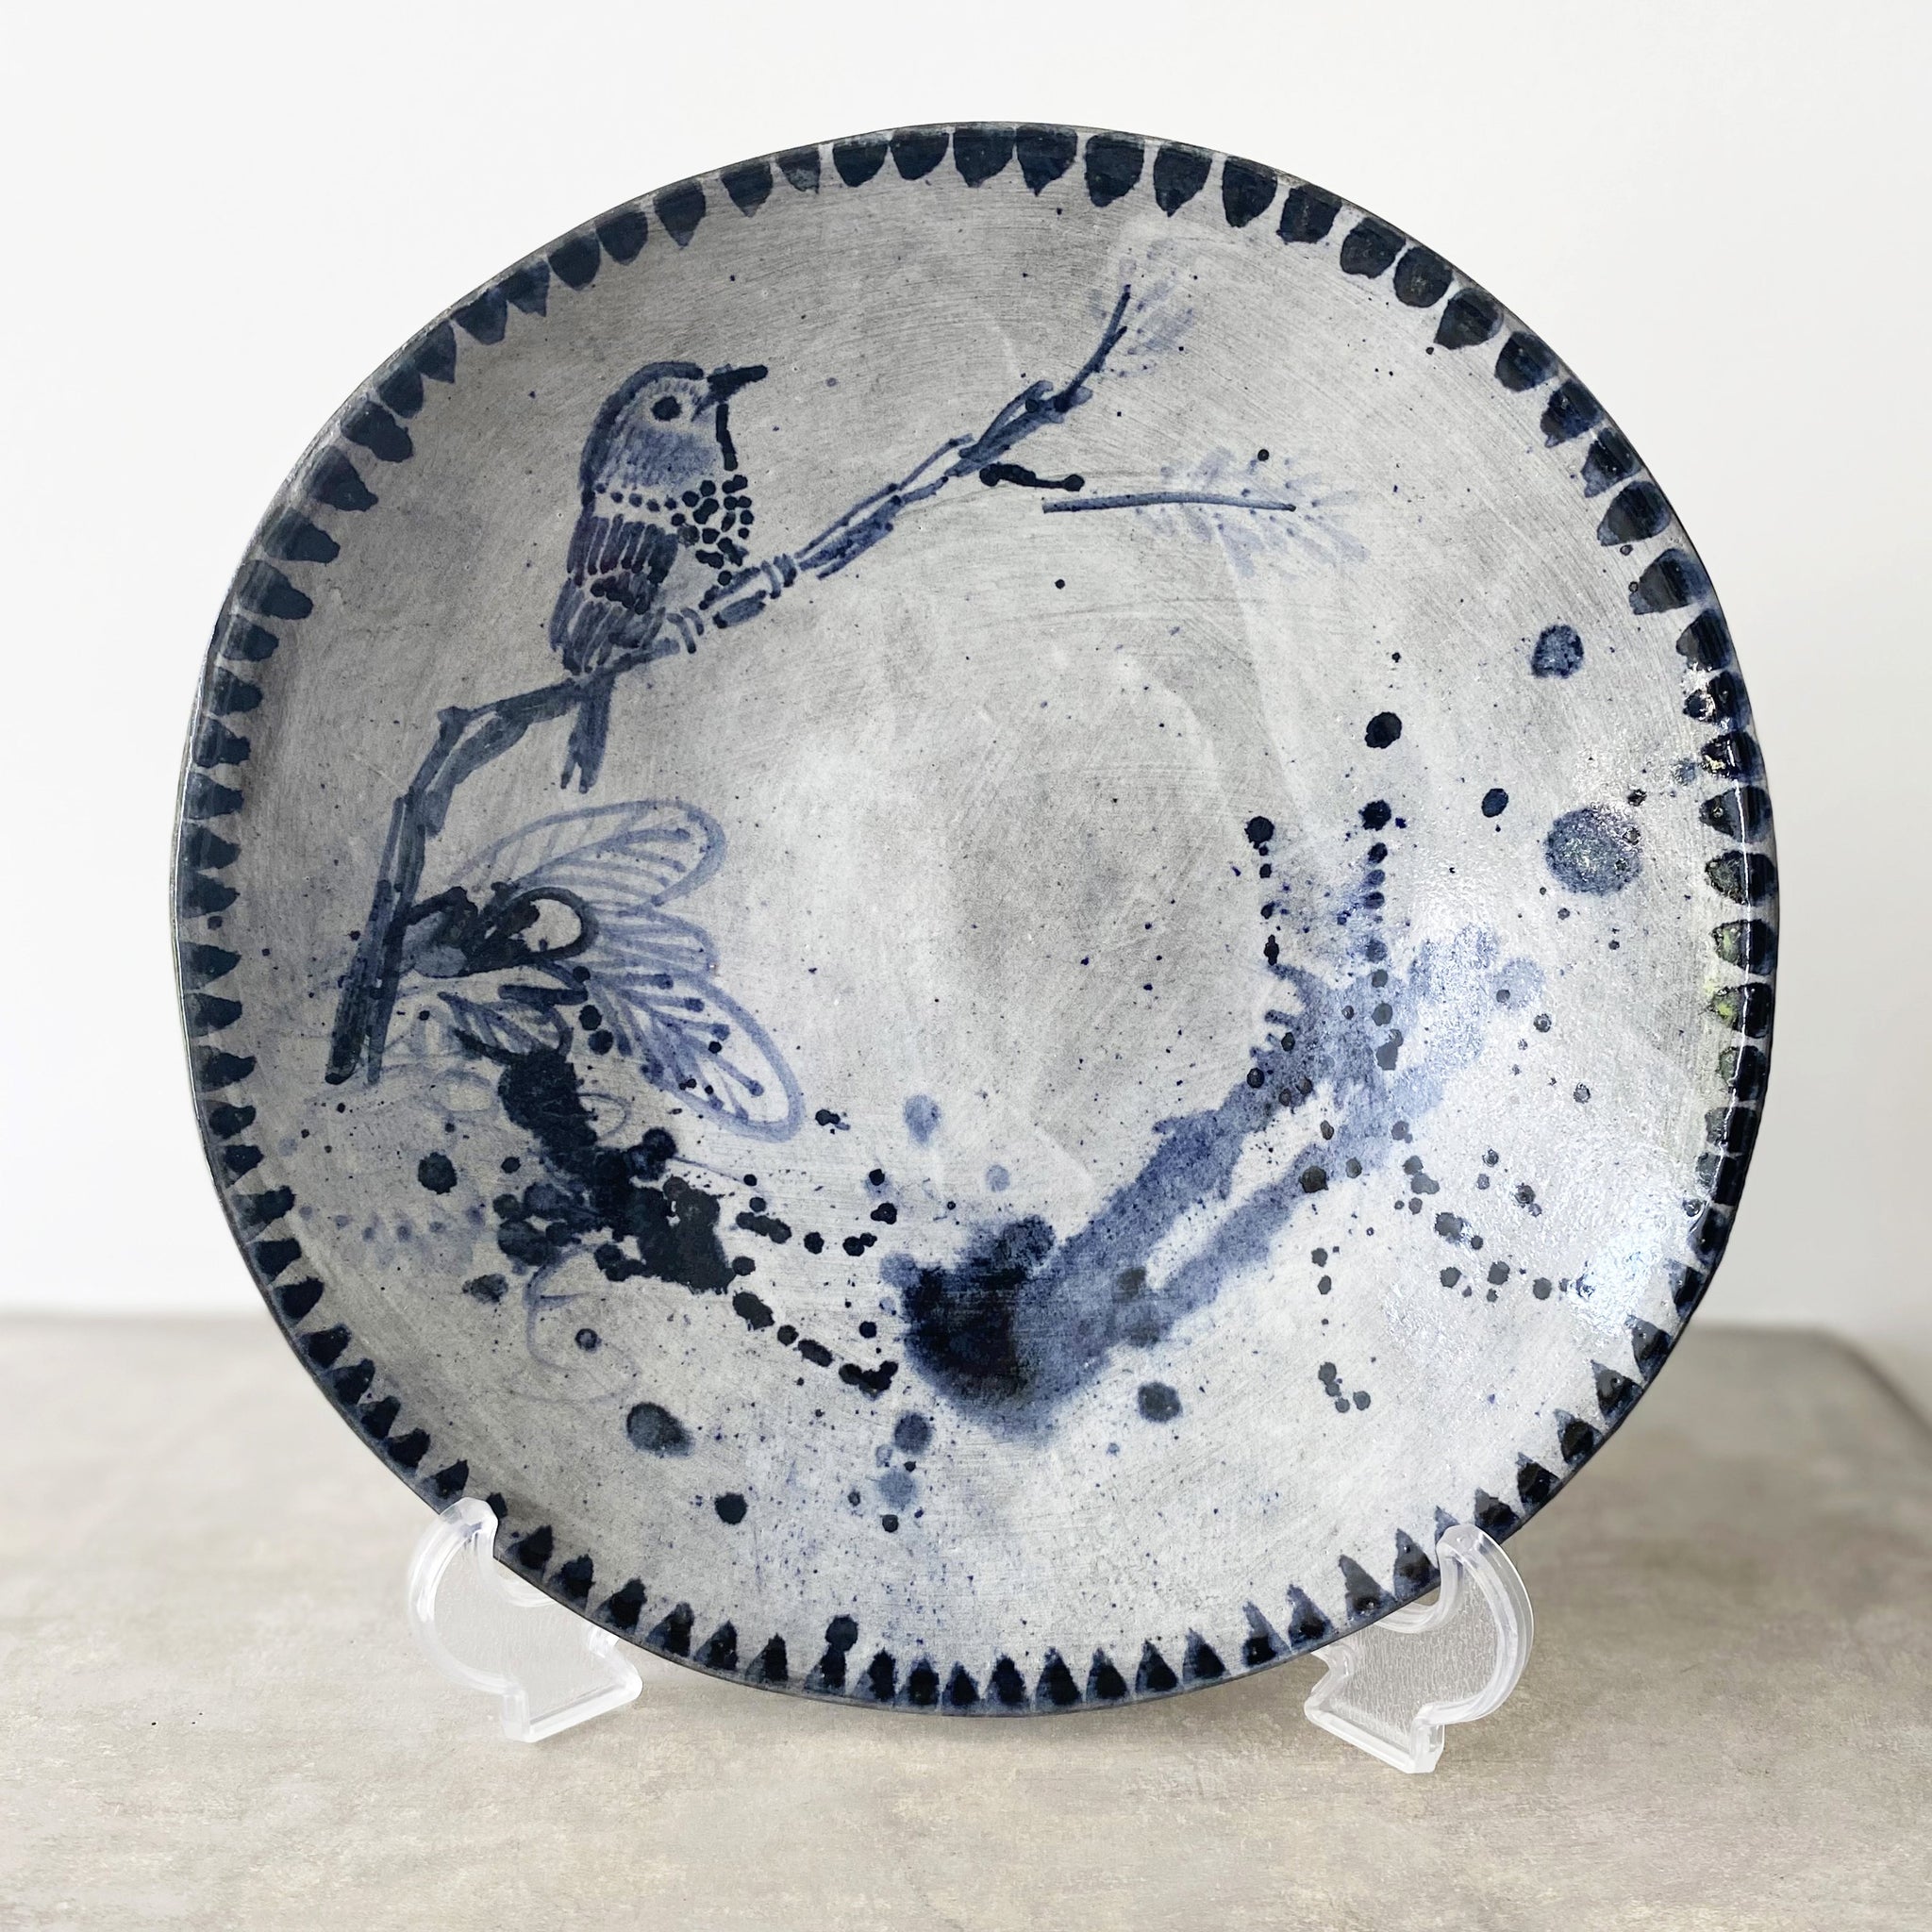 Bird on a Branch Hand Painted Ceramic Shallow Bowl (lll)